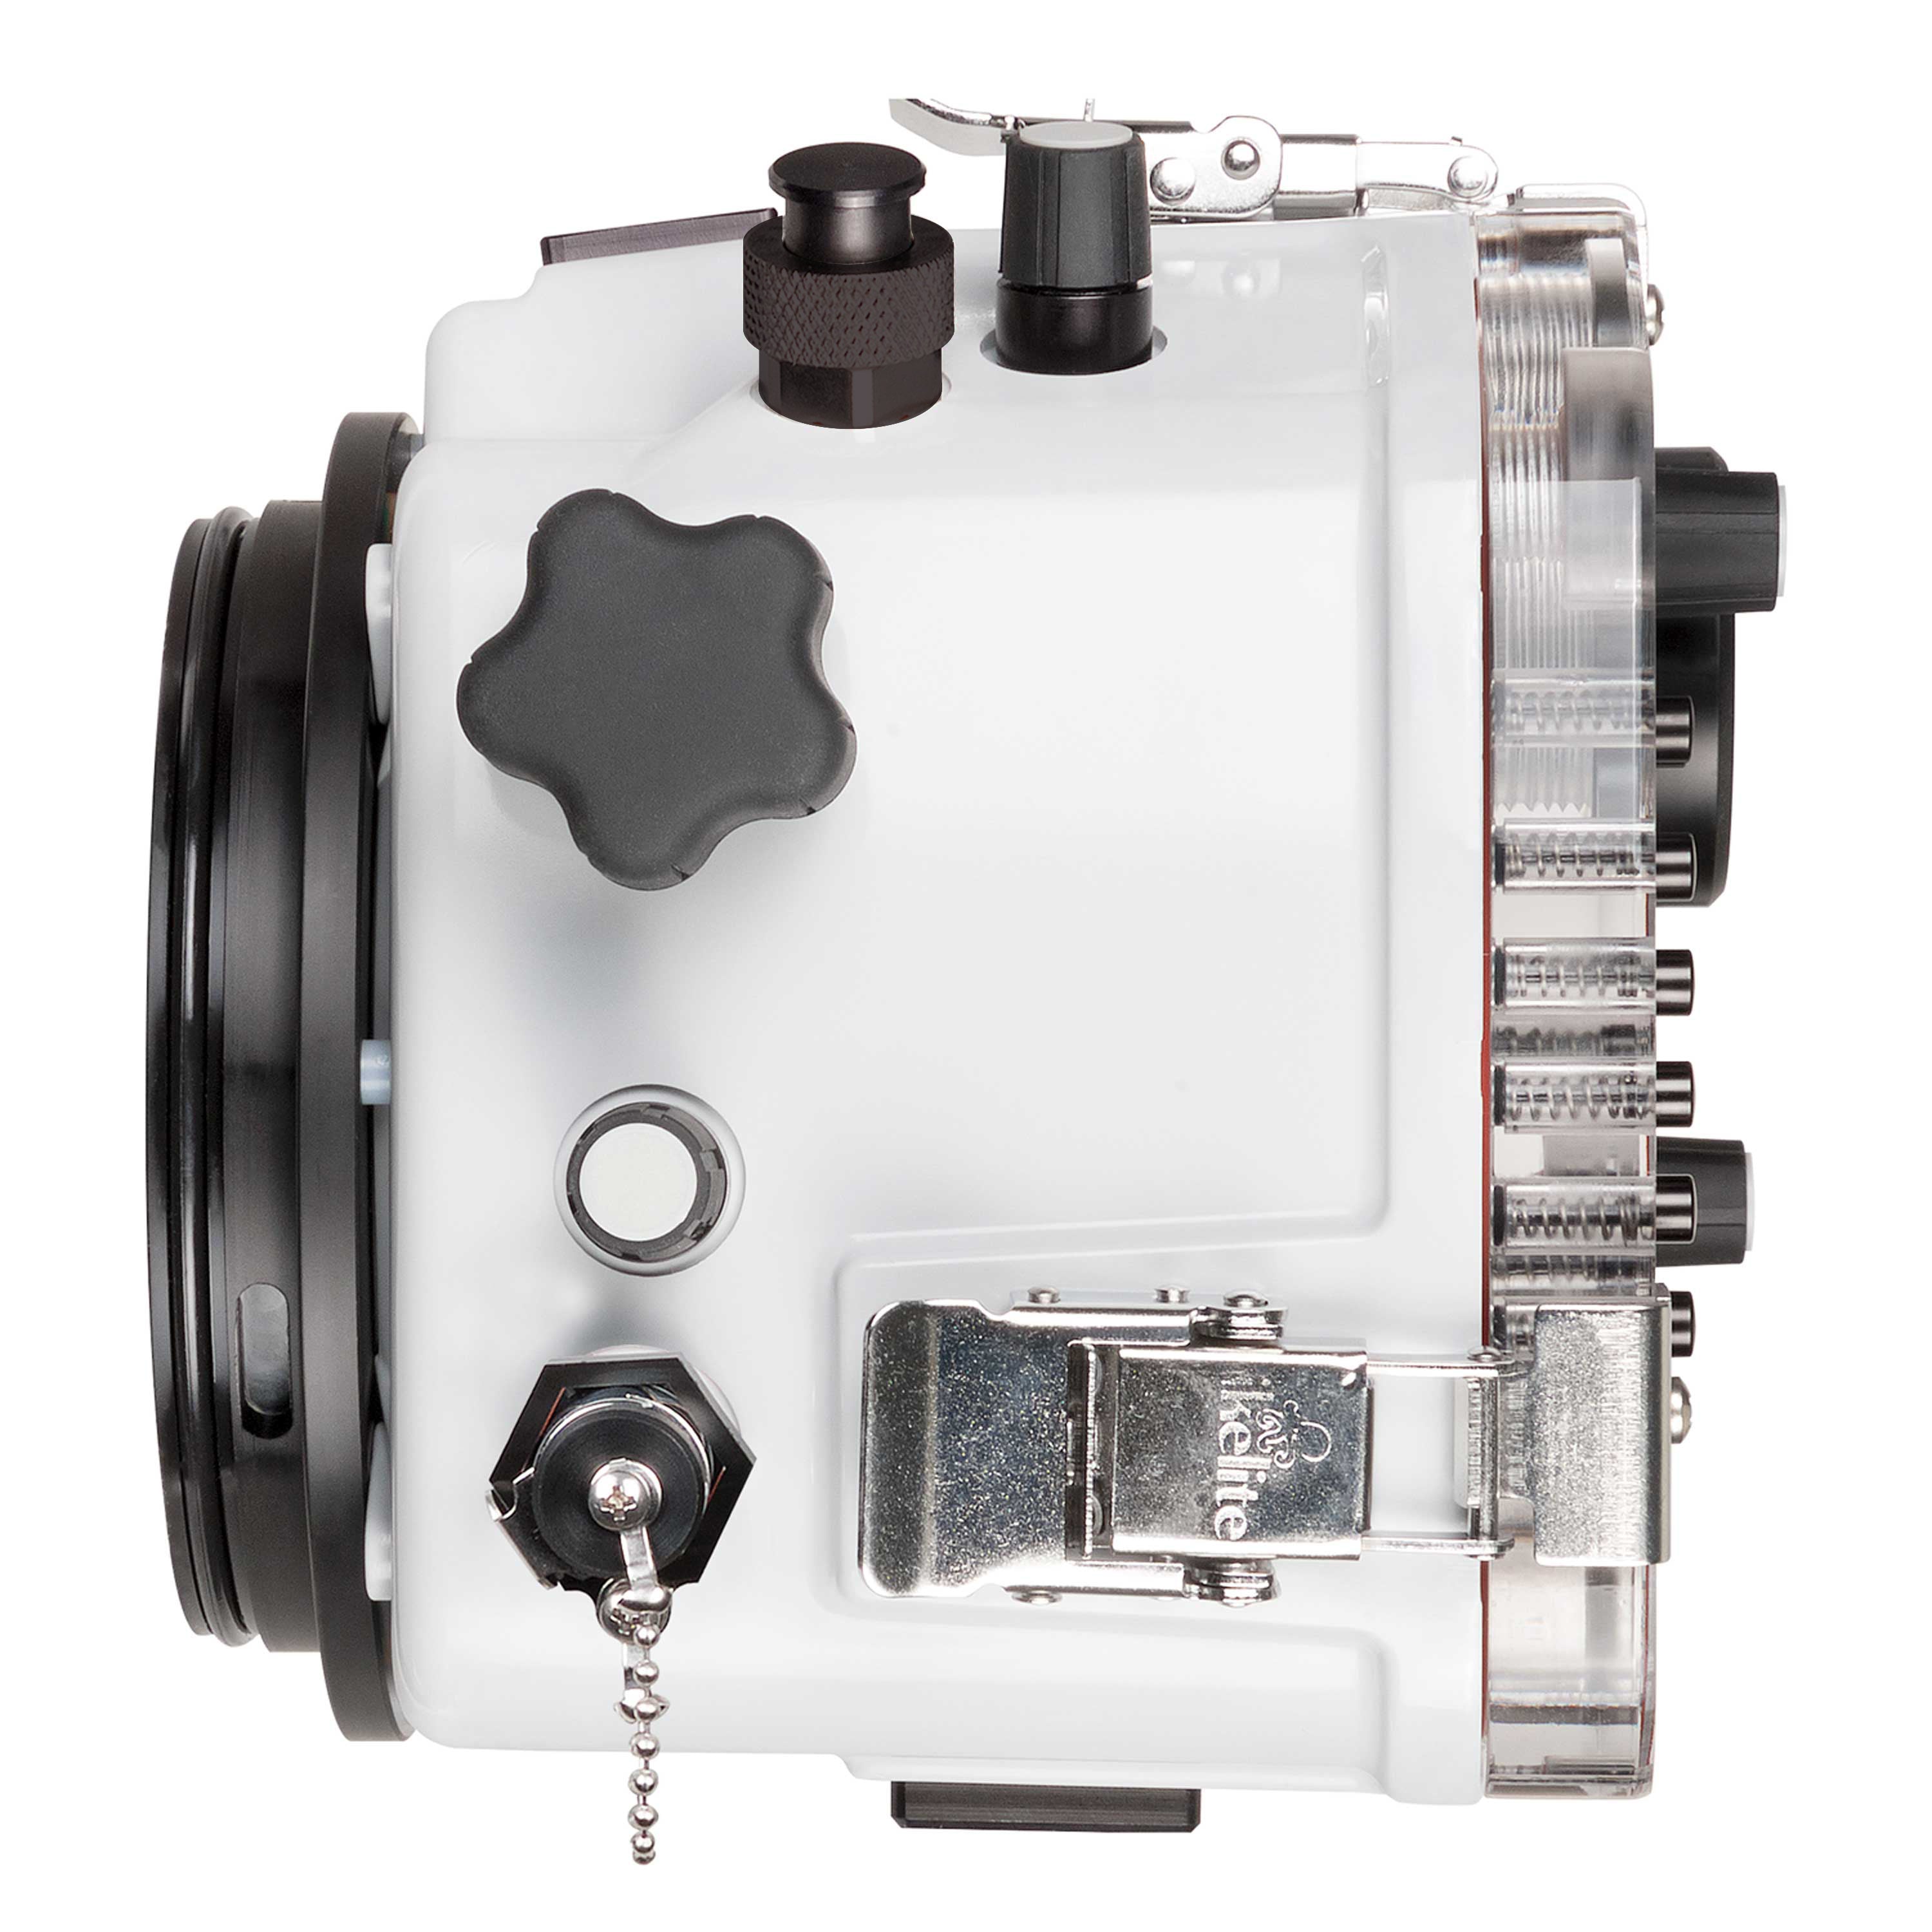 200DL Underwater Housing for Canon EOS 5D Mark III, 5D Mark IV, 5DS, 5